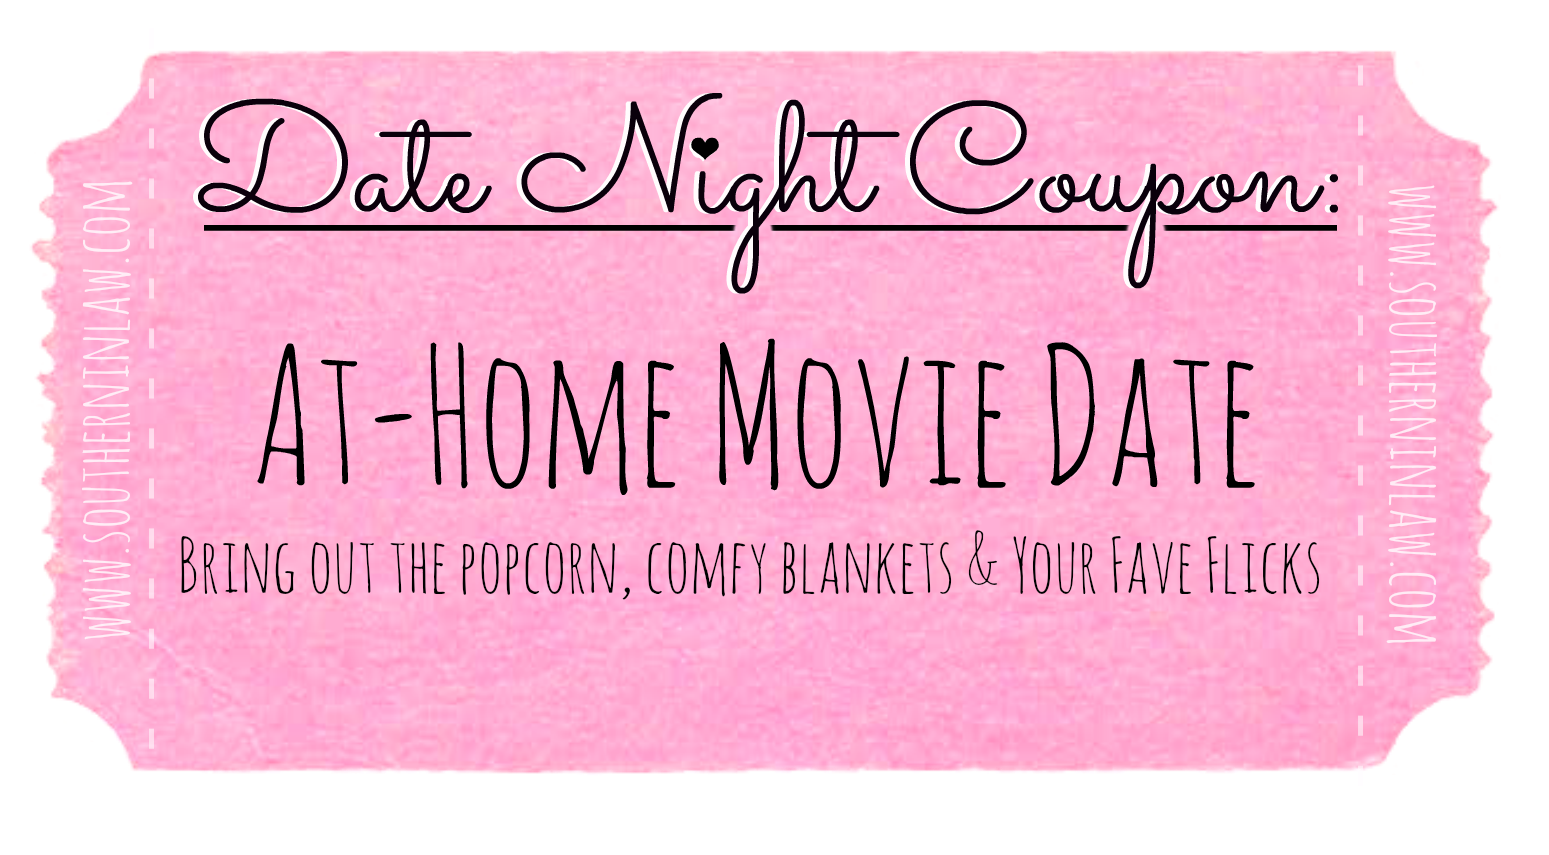 Affordable Date Ideas - Cheap Date Ideas Coupons - Have a movie day at home